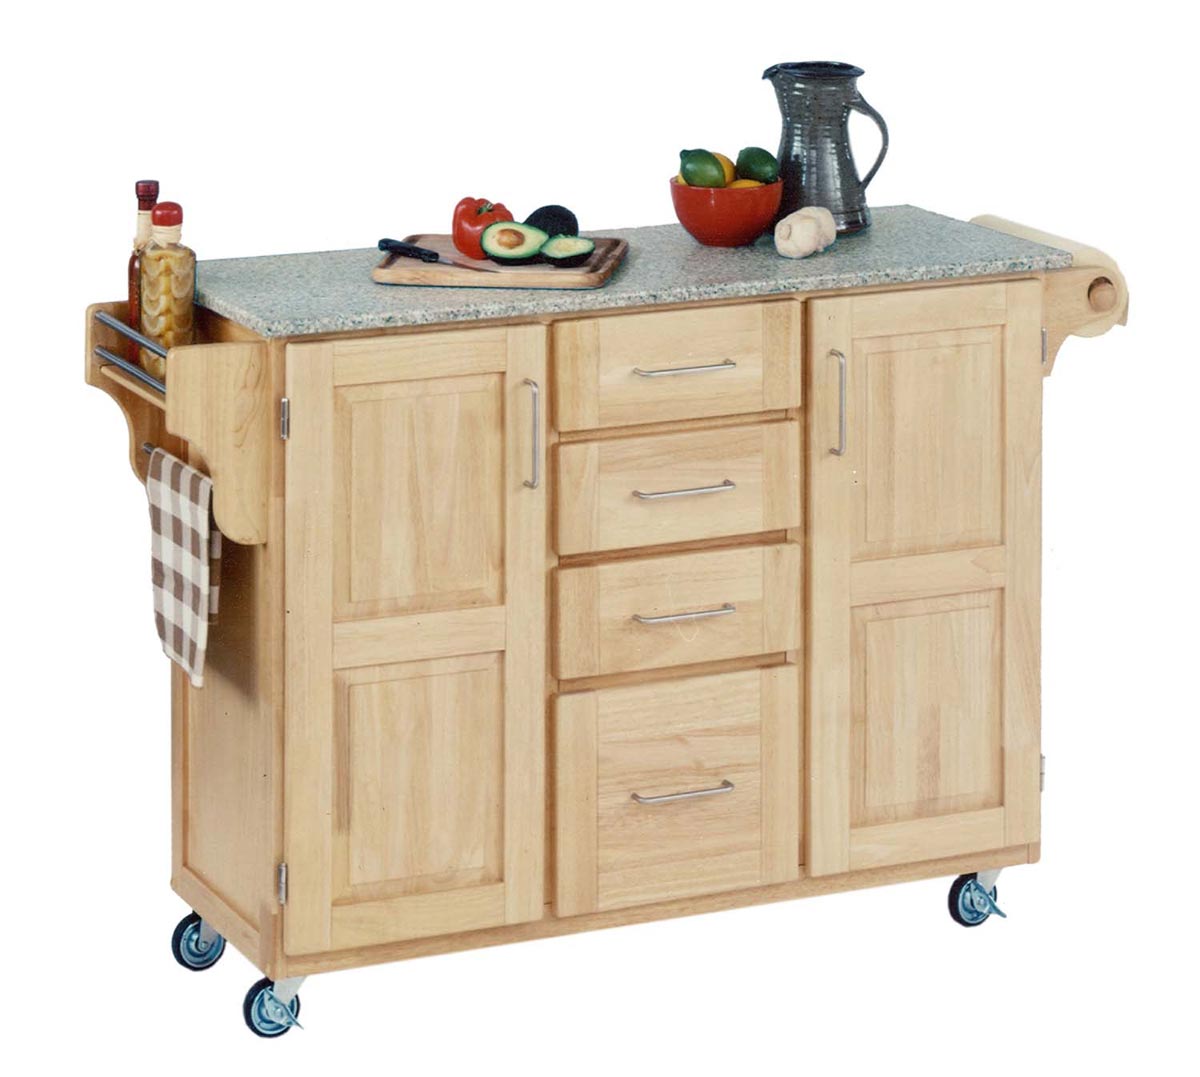 Home Styles Create-A-Cart SP Granite Top - Natural